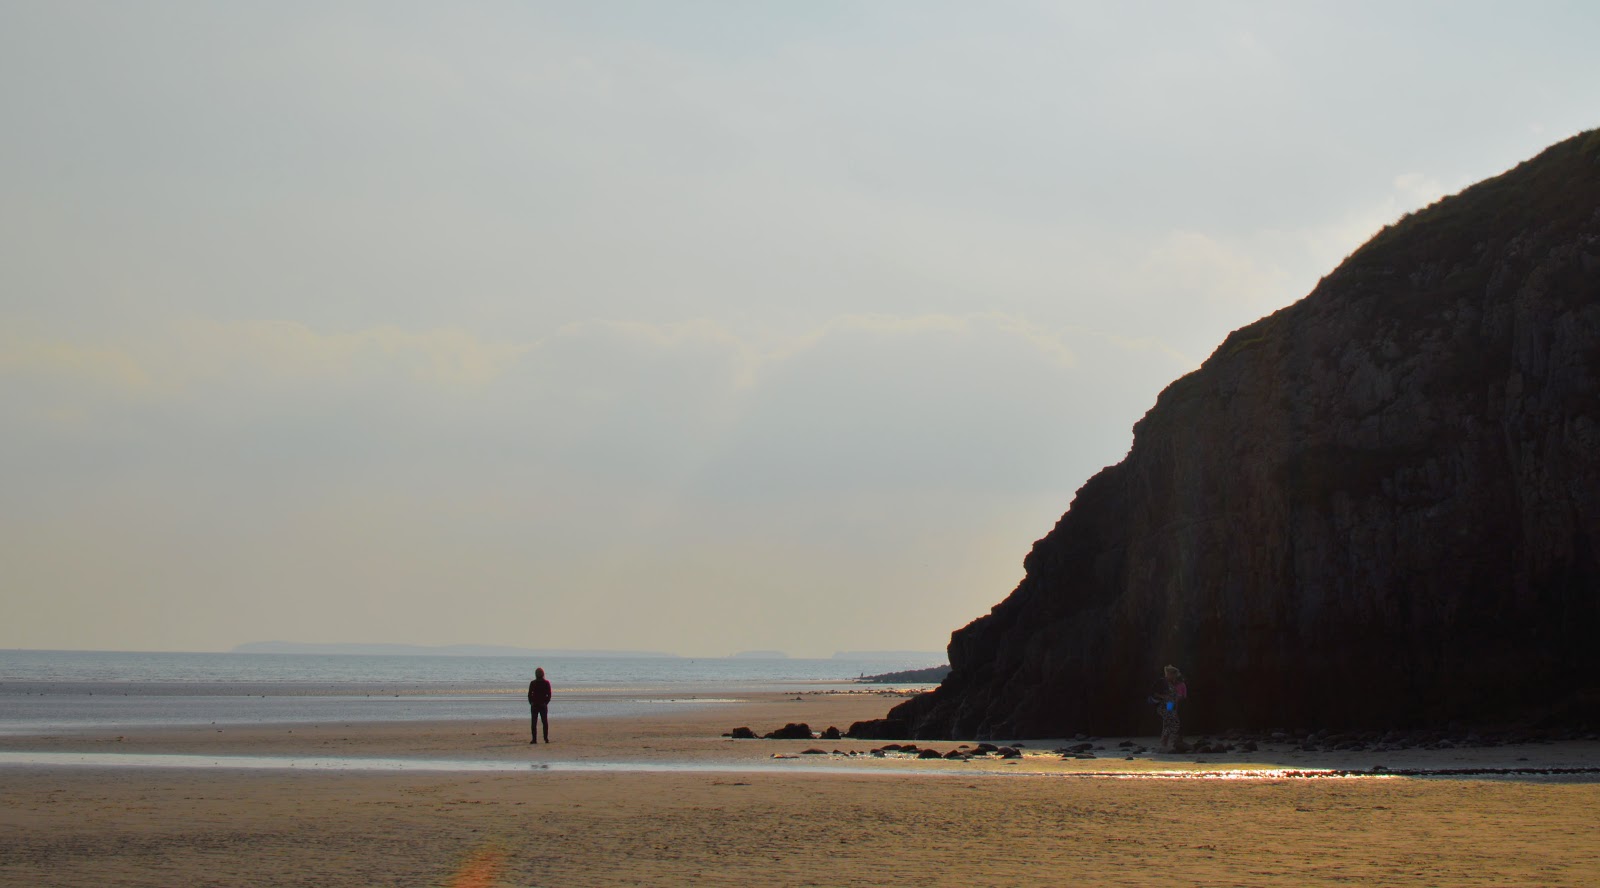 , A Day at Pendine and Laugharne- &#8220;Magical Bedlam By the Sea&#8221;